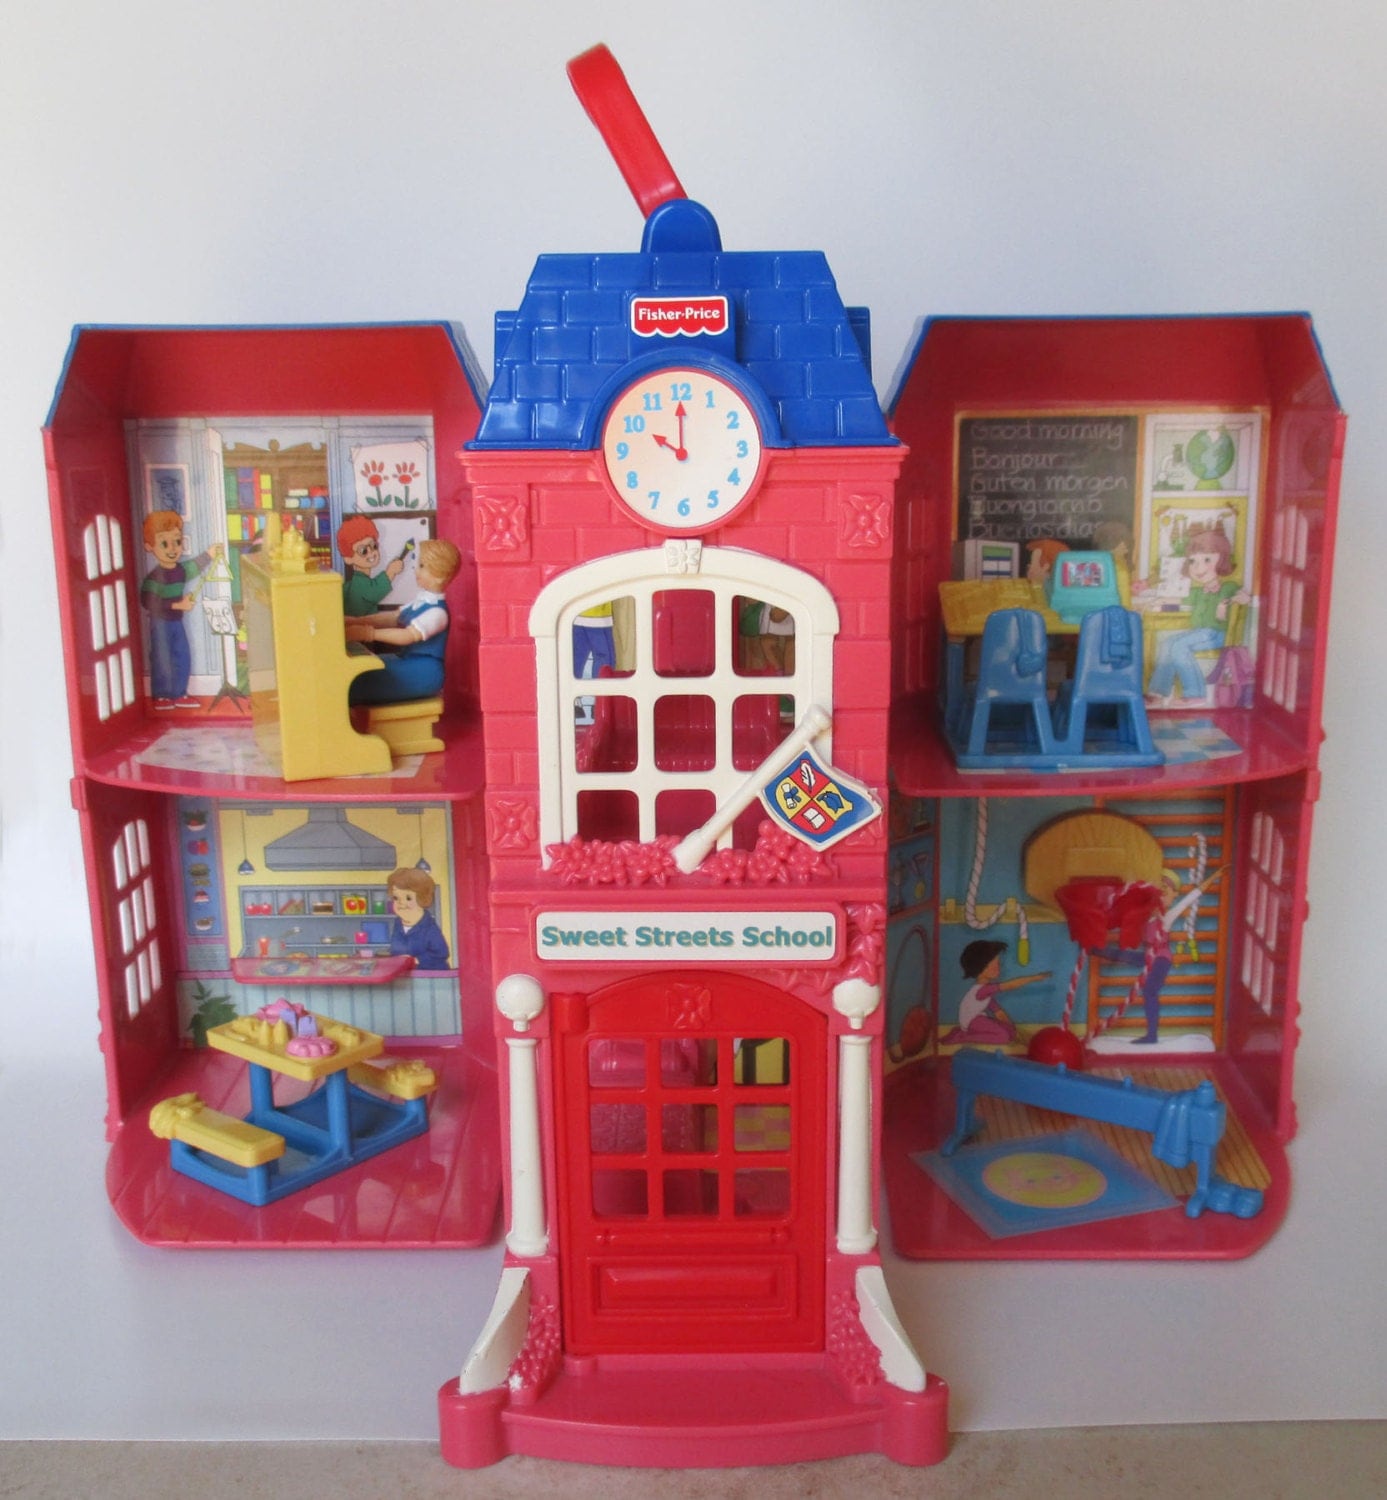 dollhouse Fisher Price Sweet Streets School by 0etsy0antiques0